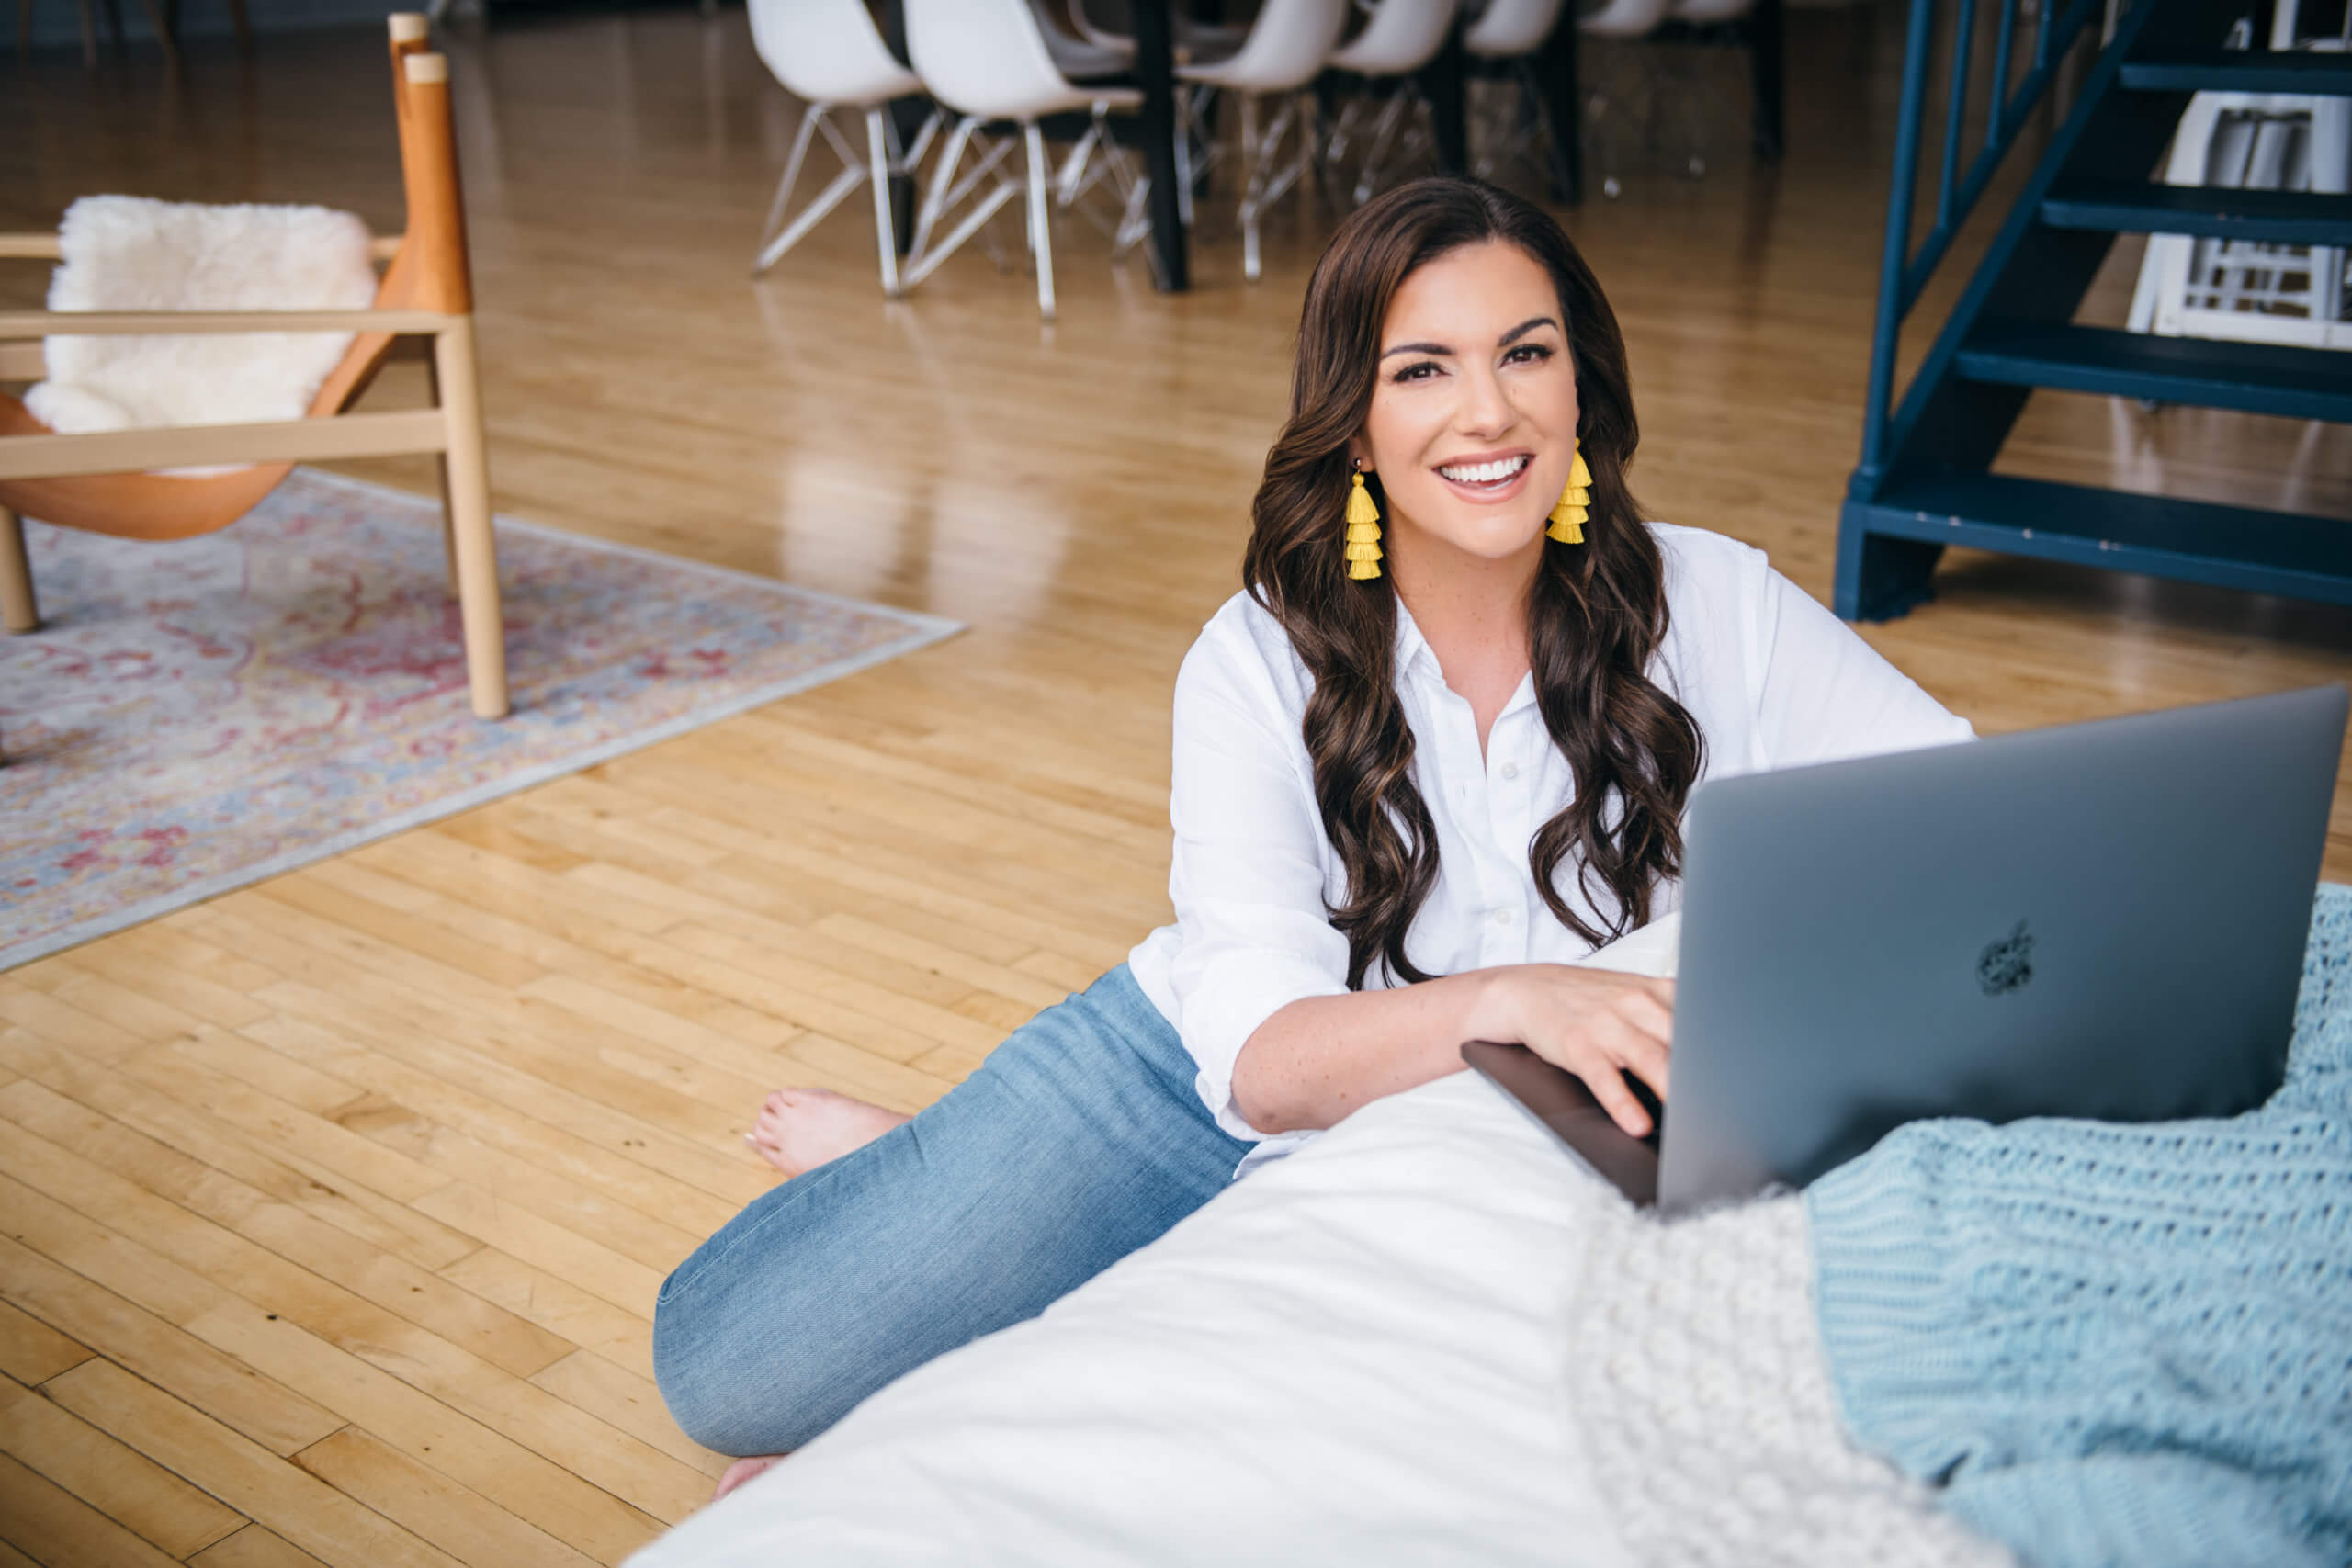 Amy Porterfield is sitting on the floor smiling at the camera with a laptop on the sofa in front of her.